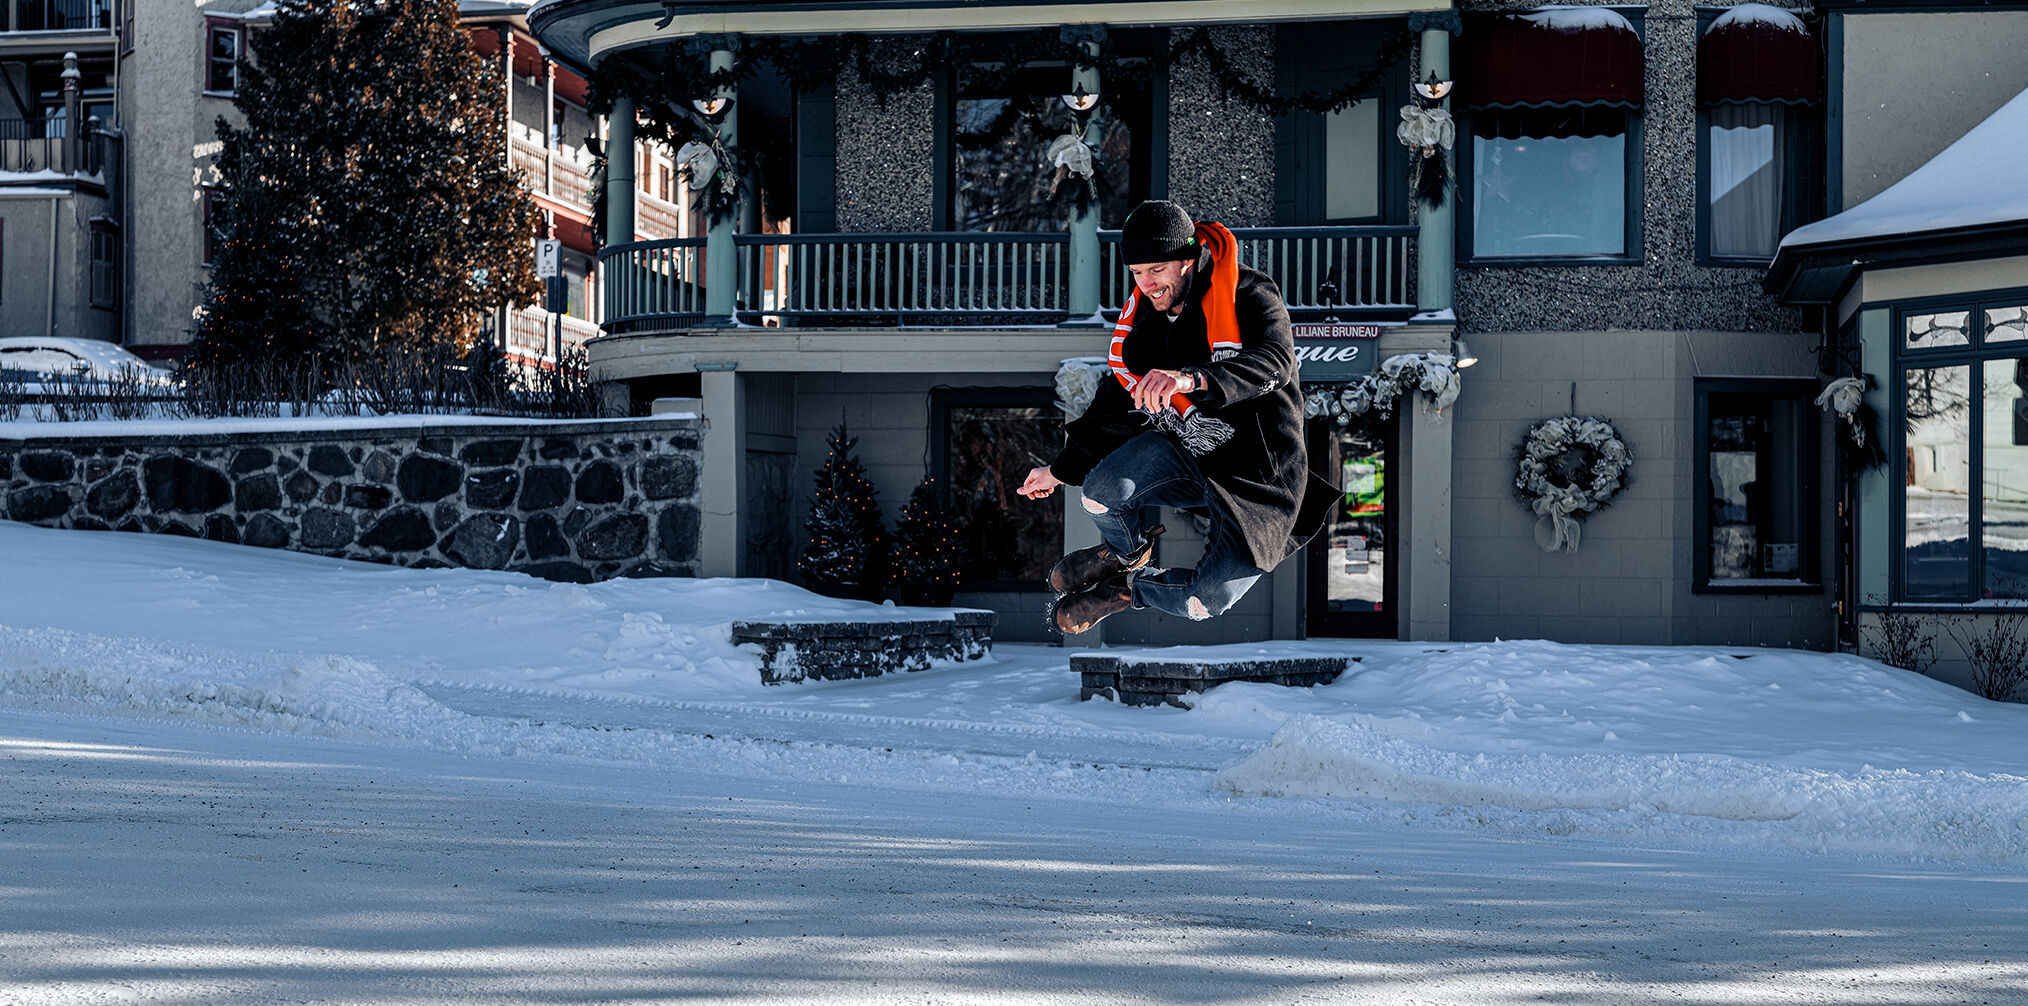 Max Parrot is snowboarding in the street